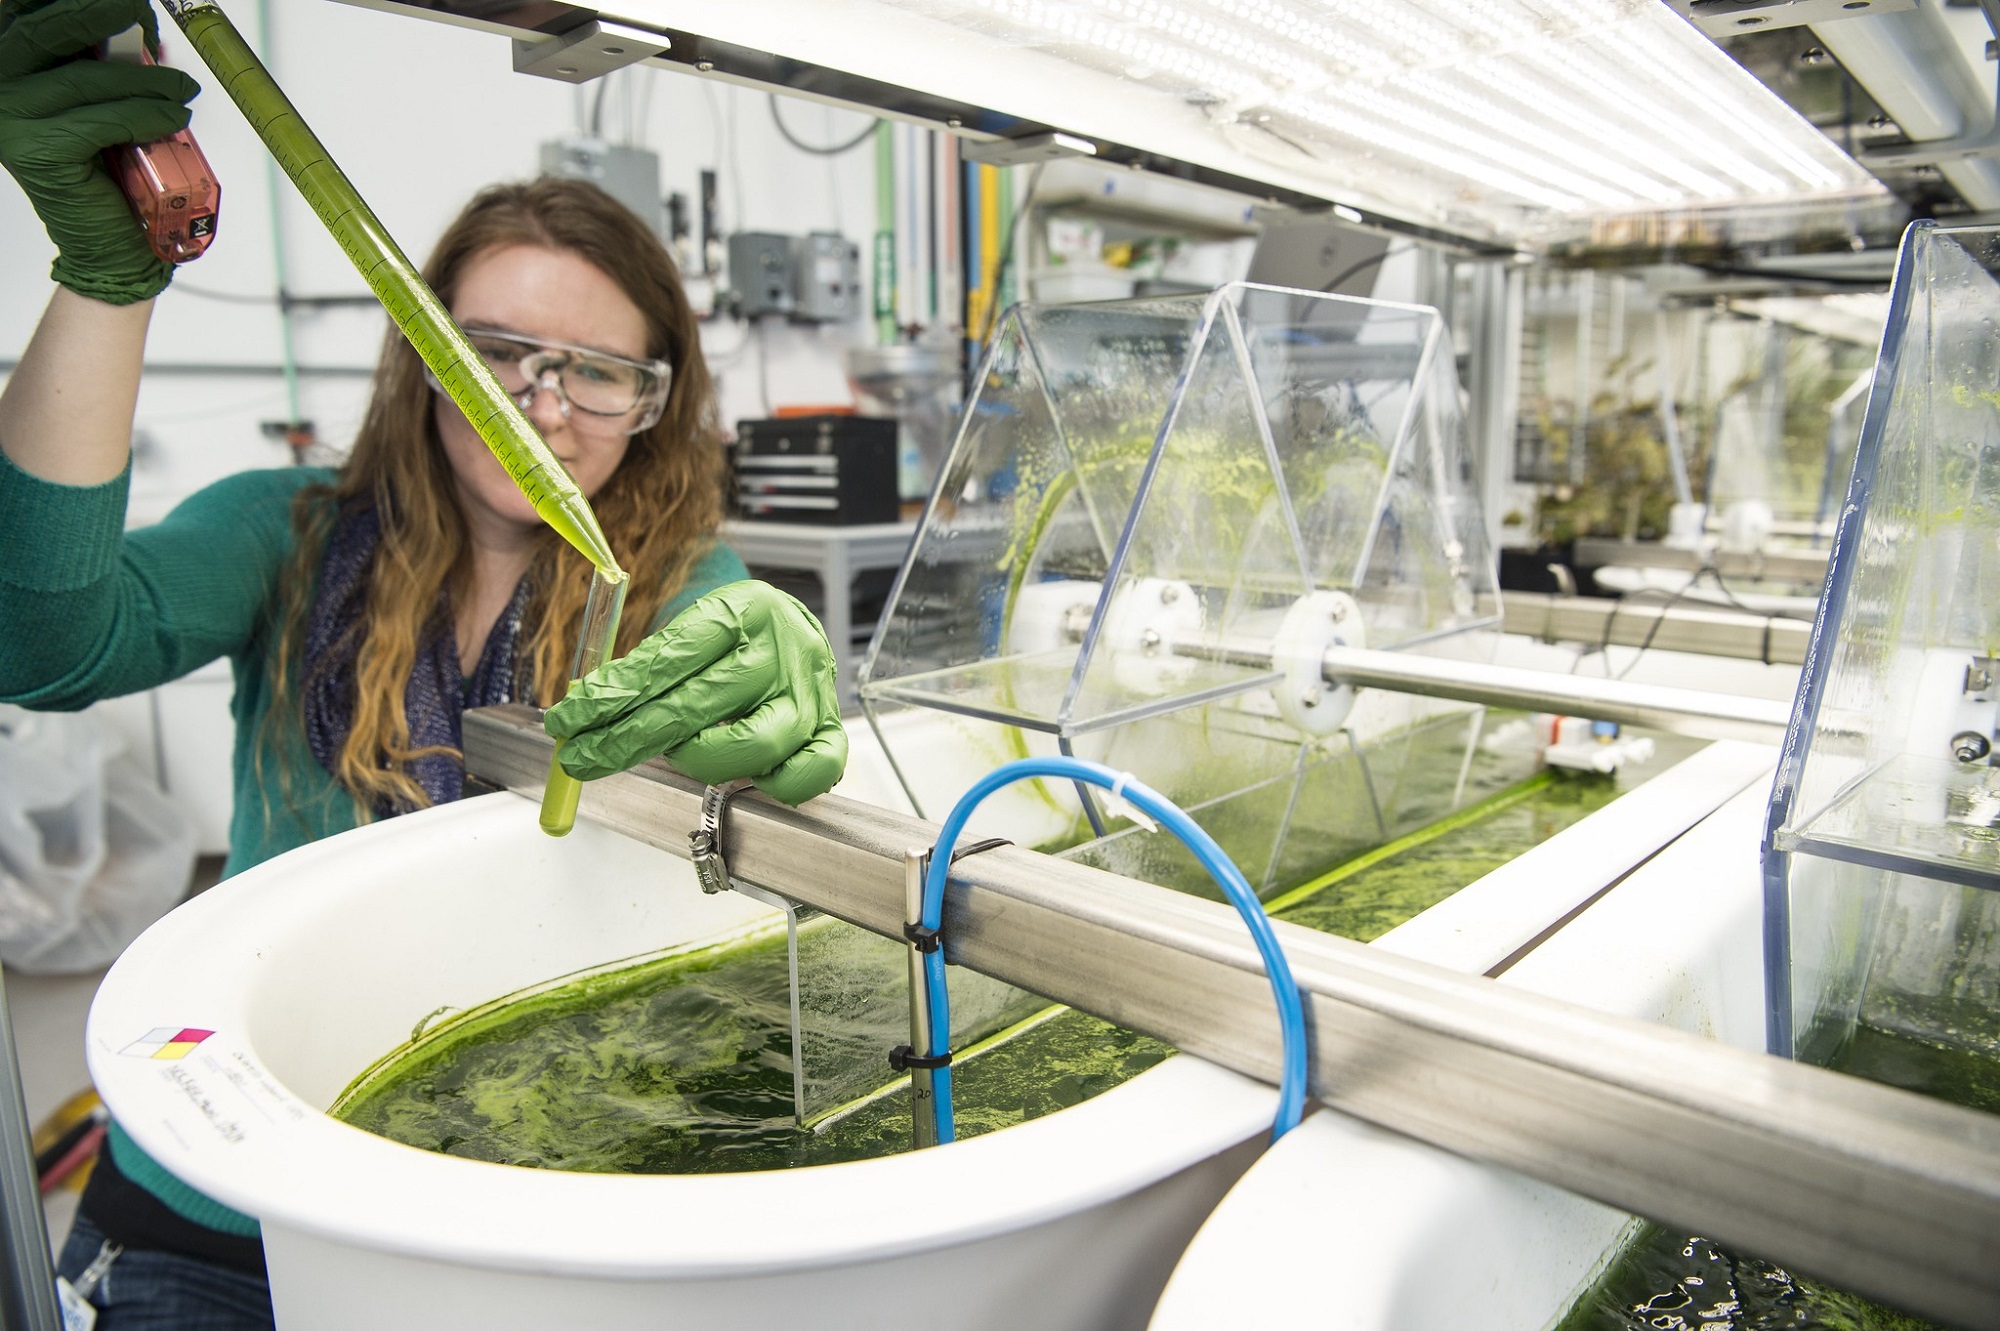 How to make algae biofuel and feedstock less expensive | Popular Science